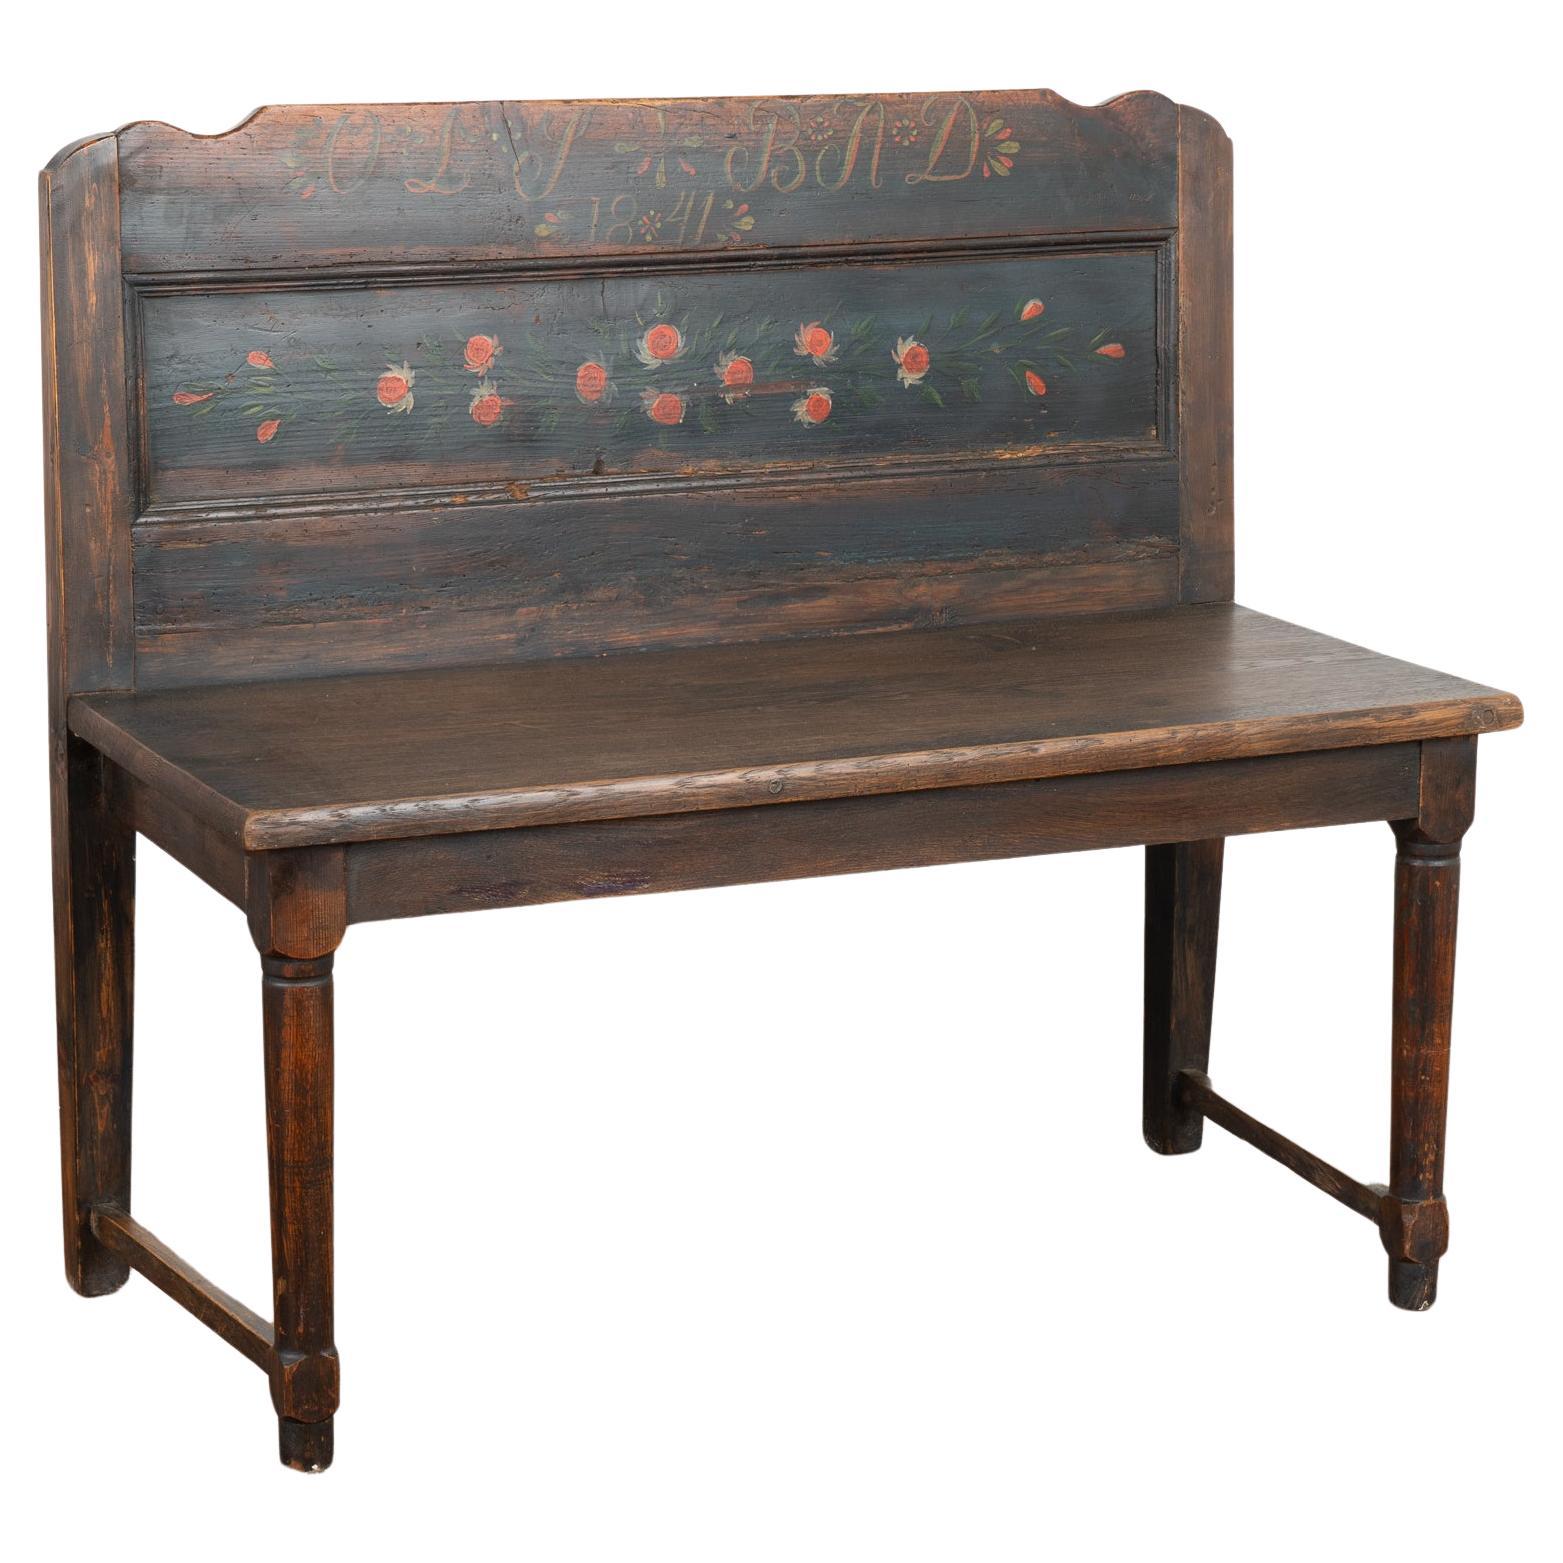 Original Painted Small Bench, Hungary Dated 1841 For Sale